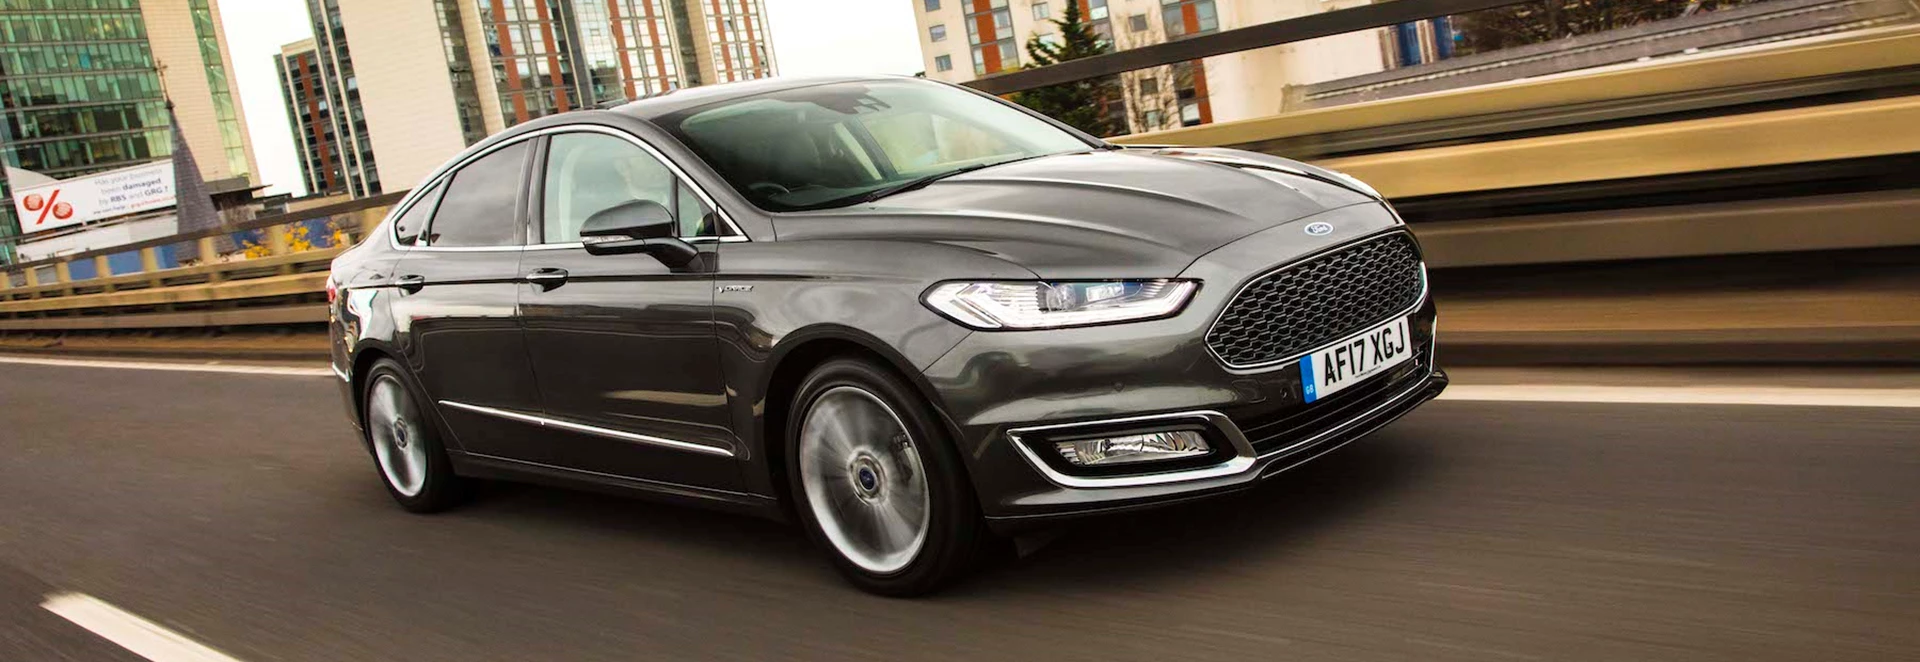 Next-generation Ford Mondeo set to launch in 2021 